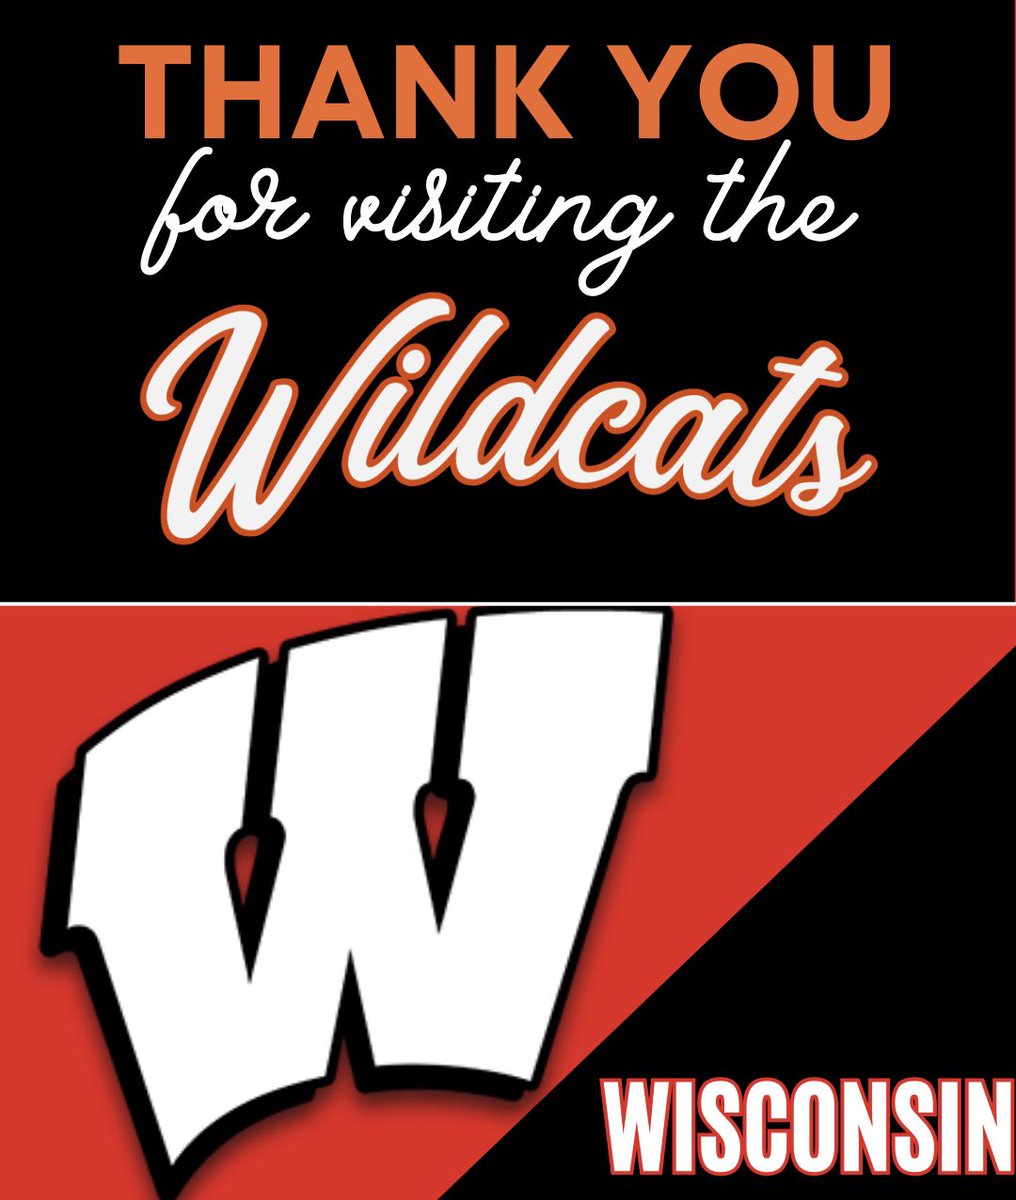 Thank you @CoachMikeTress and @Haynes_Badgers from @BadgerFootball for visiting @VeronaWildcatFB today! #OnWisconsin #RollCats #wisfb